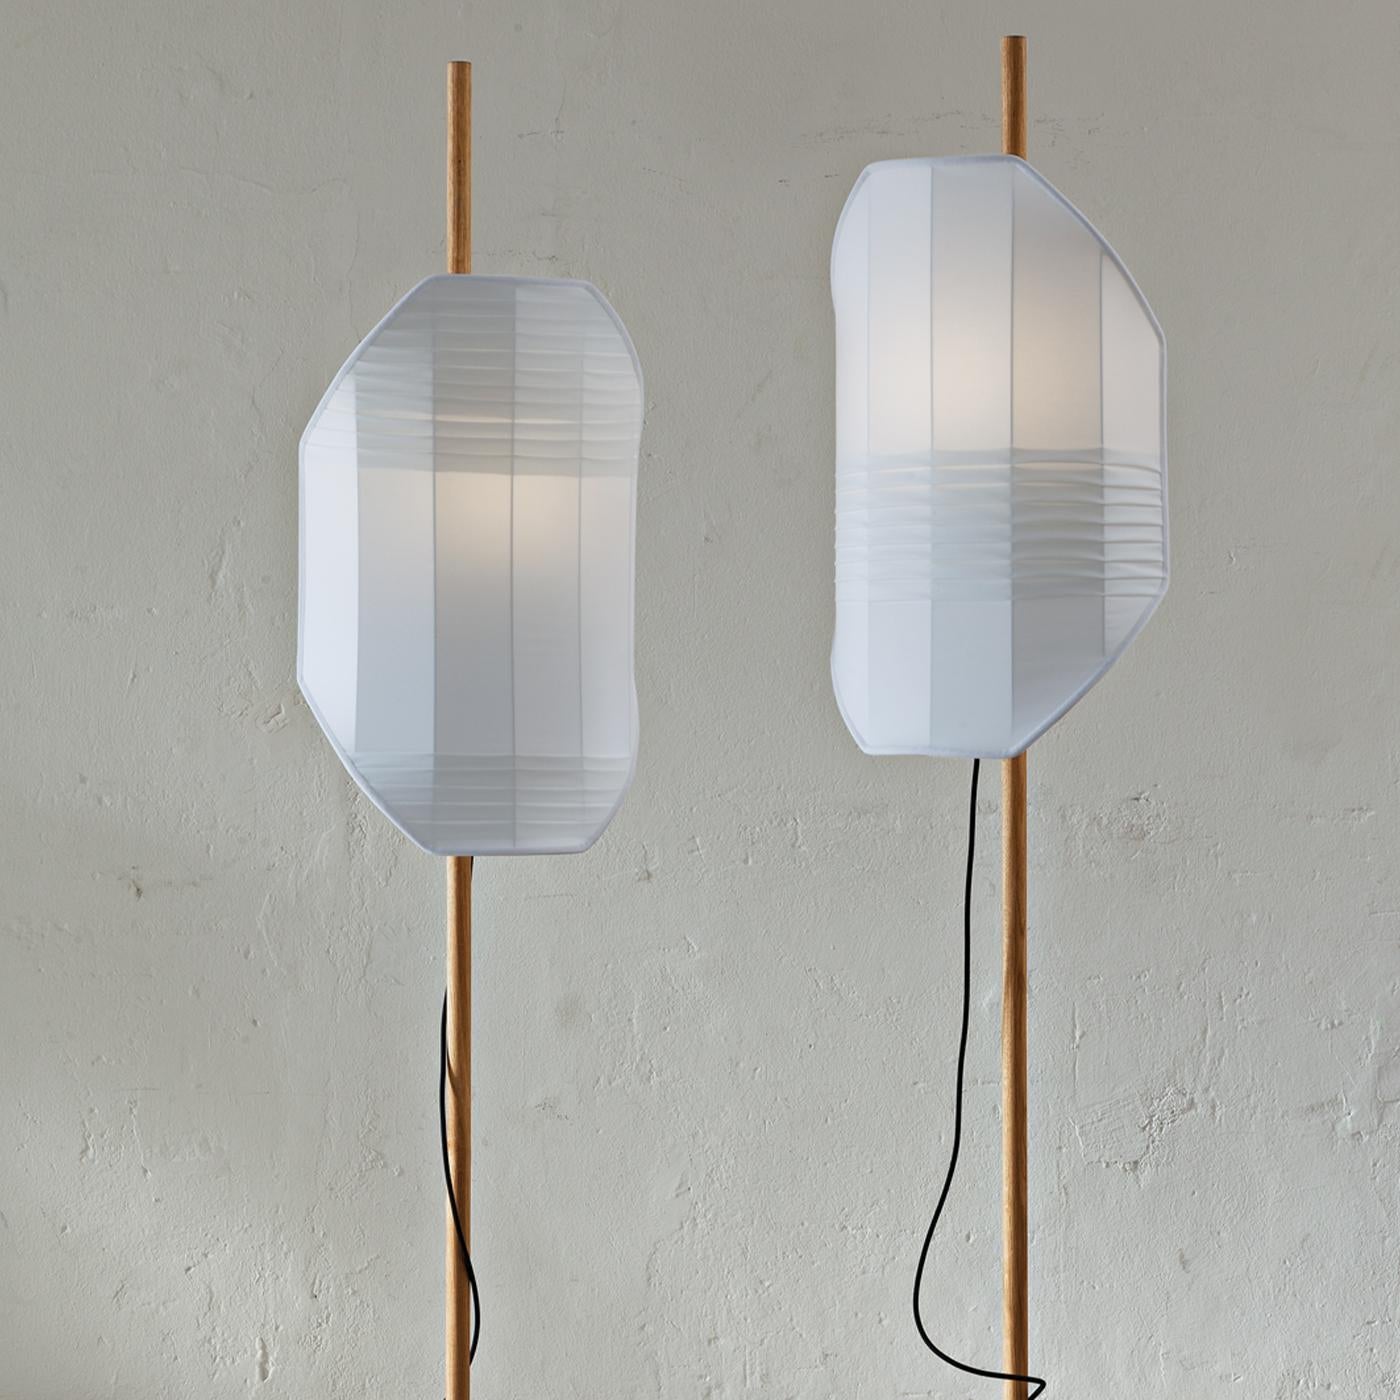 This lamp takes inspiration from the image of a flag hammered into a stone, as the gesture of marking a place off the beaten track with a visible sign. A luminescent screen hung from an oak pole, tucked into a piece of circular 